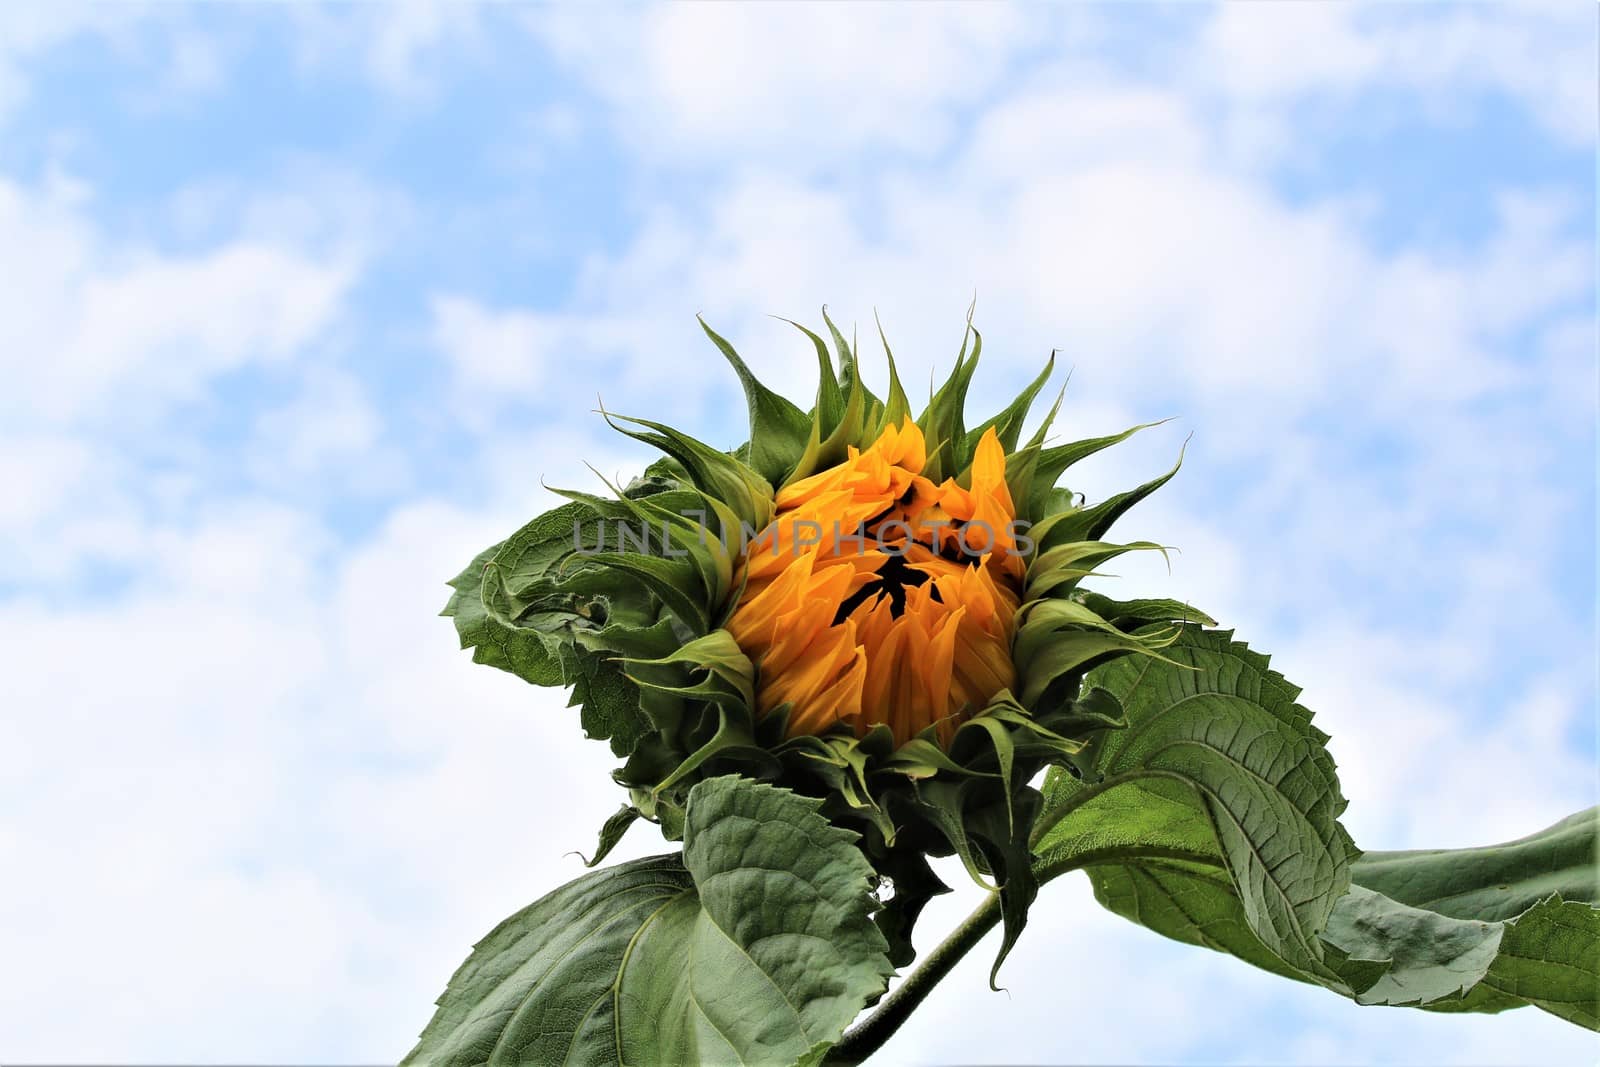 Just opening sunflower with green leaves against a cloudy sky